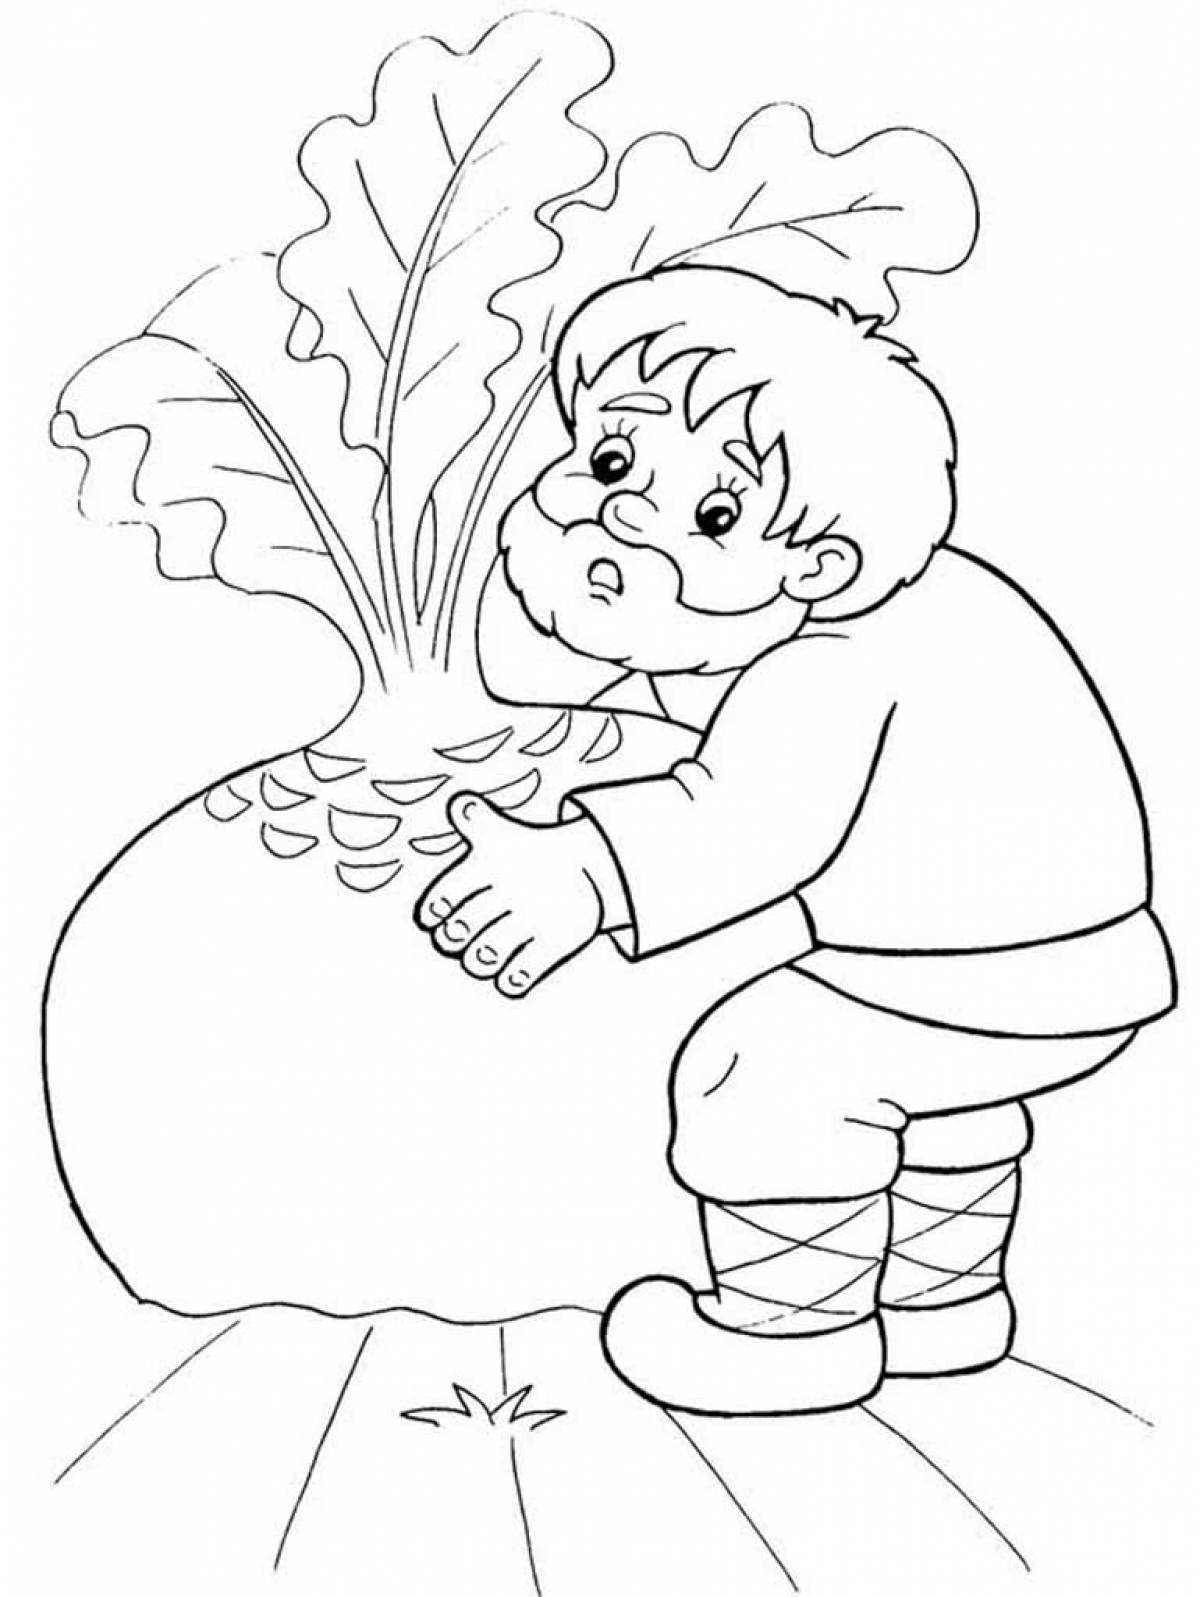 Coloring page grandfather pulls a turnip